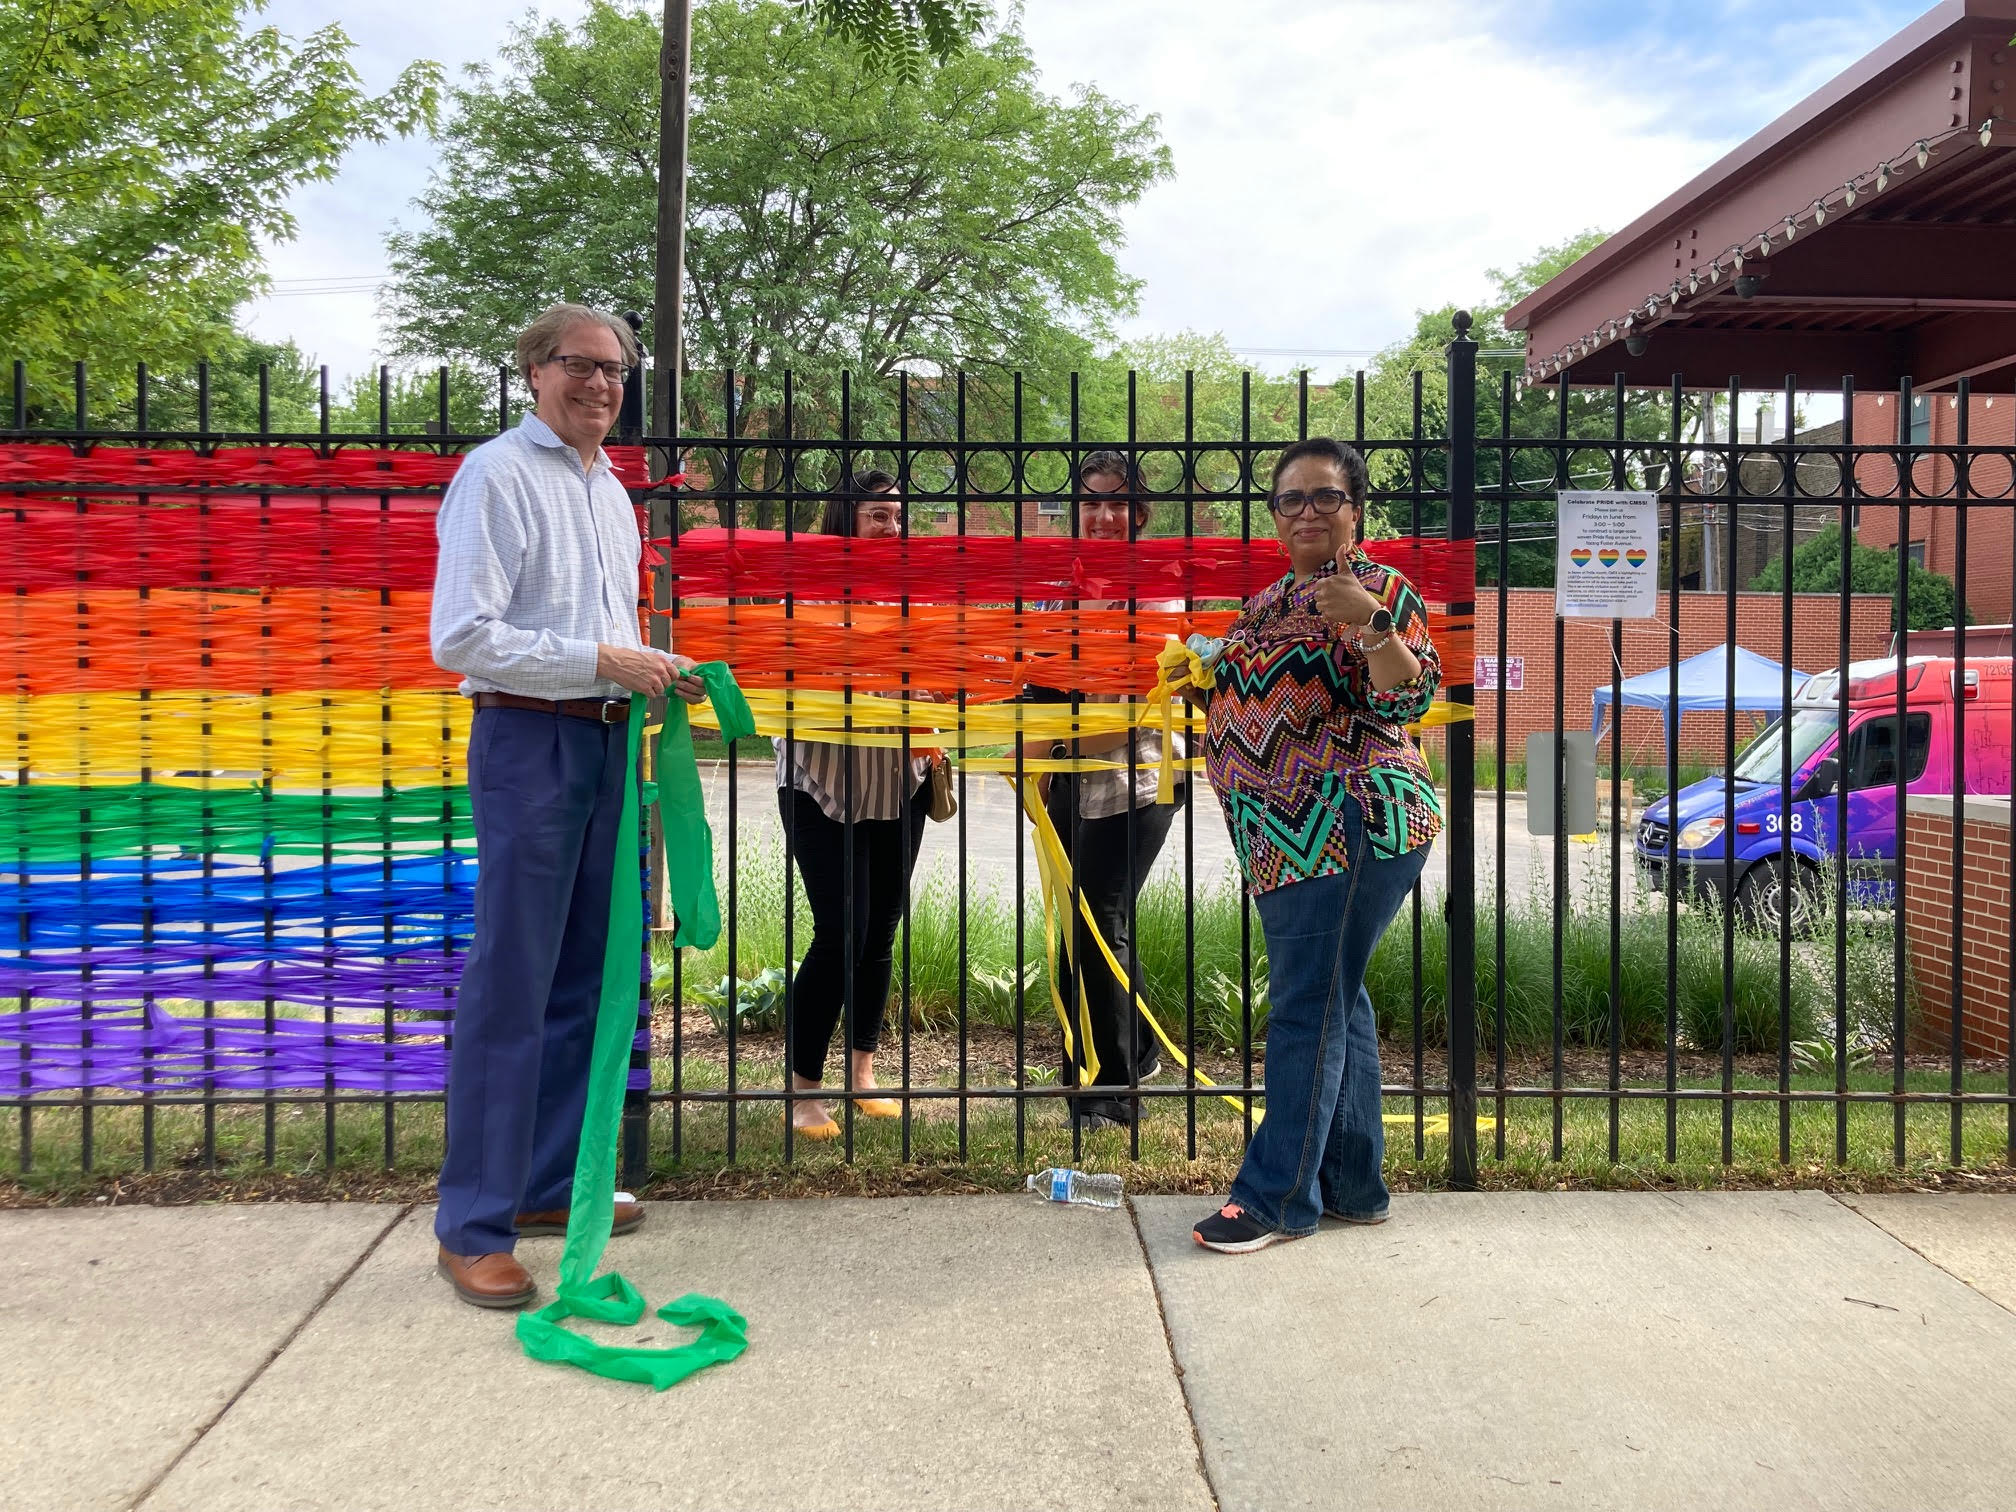 A man and woman put up ribbons in the color of the rainbow along an iron wrought fence in celebration of Pride.